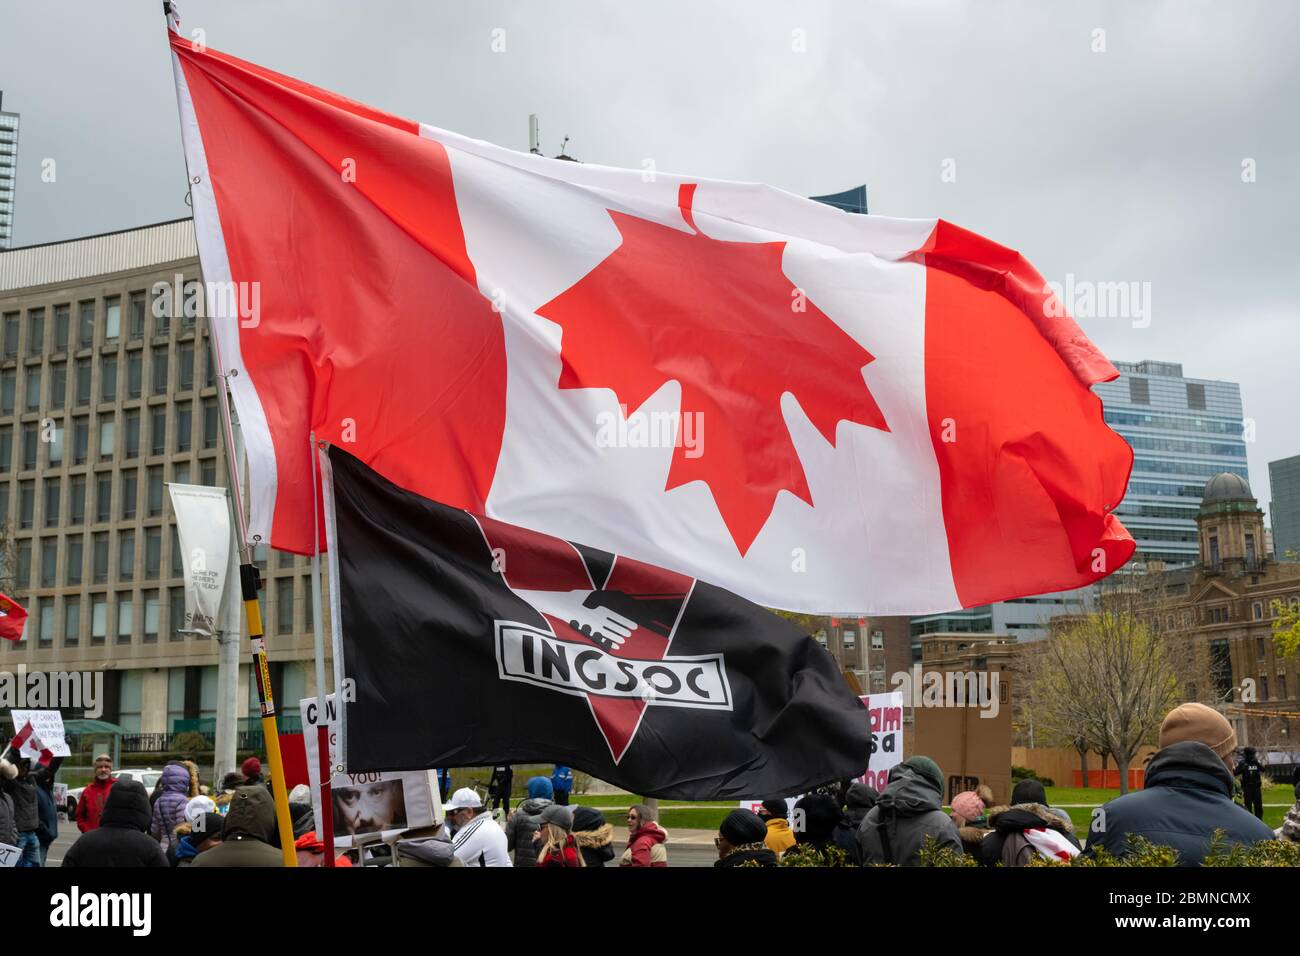 An INGSOC flag from George Orwell's 1984 flies alongside an upside-down Canada Flag outside Queen's Park at a protest against the COVID-19 Shutdown. Stock Photo